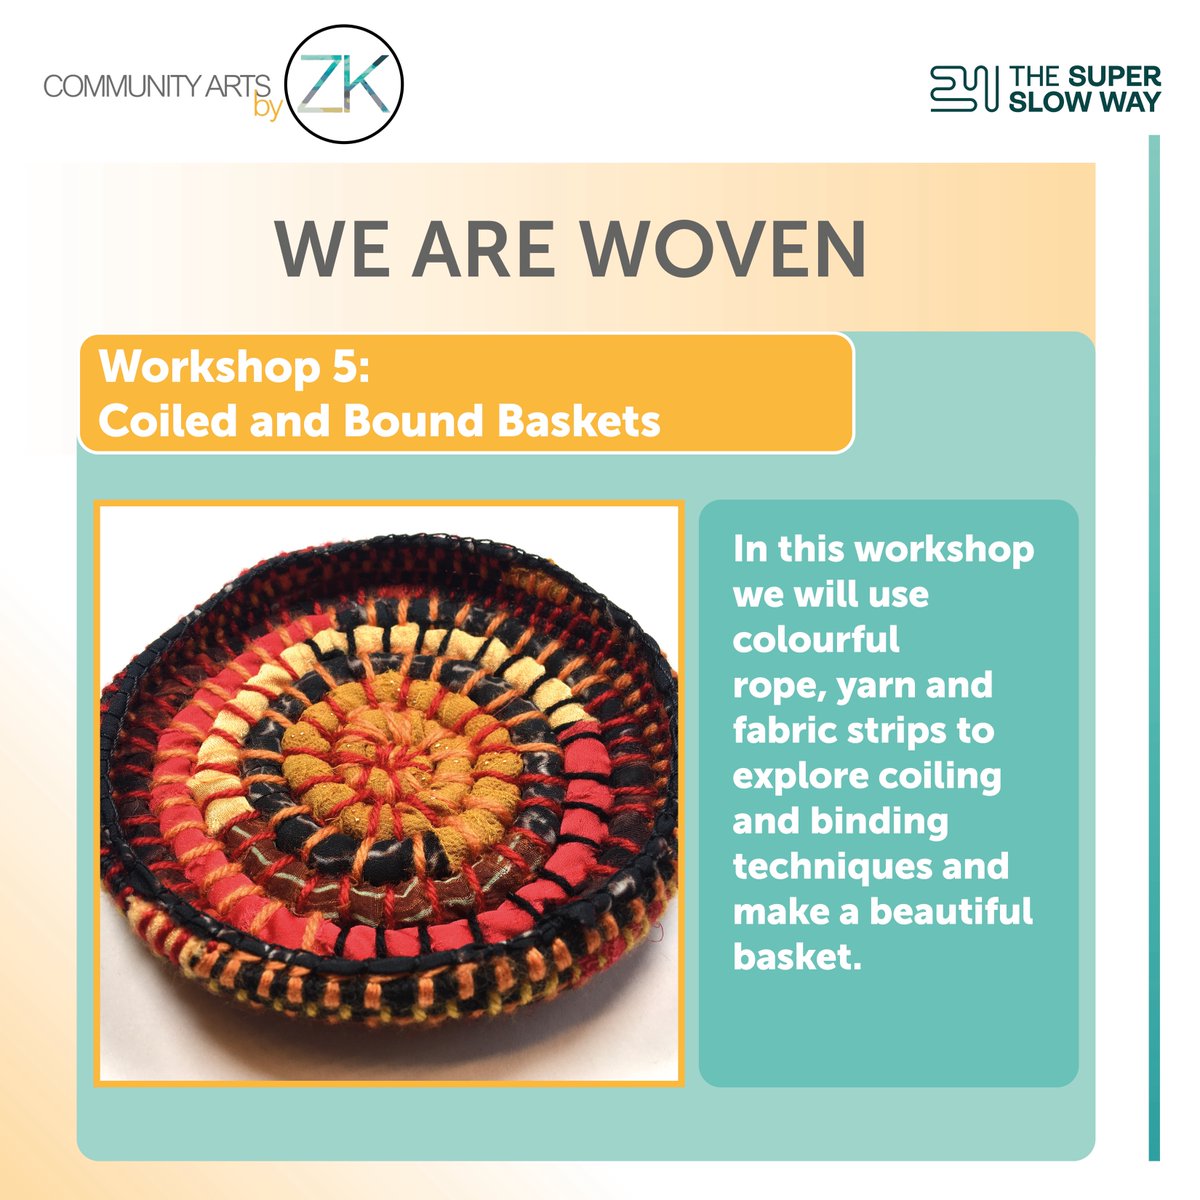 In today's workshop, artist Jenny Waterson will be teaching the group how to make colourful woven baskets! 

We can't wait!

@jw4art @Superslowway @InSitu_1 @PendleHillLP @NorthlightE @BPRCVS #weaving #baskets #textiles #communityarts #workshop #art https://t.co/3IMqmyC27a